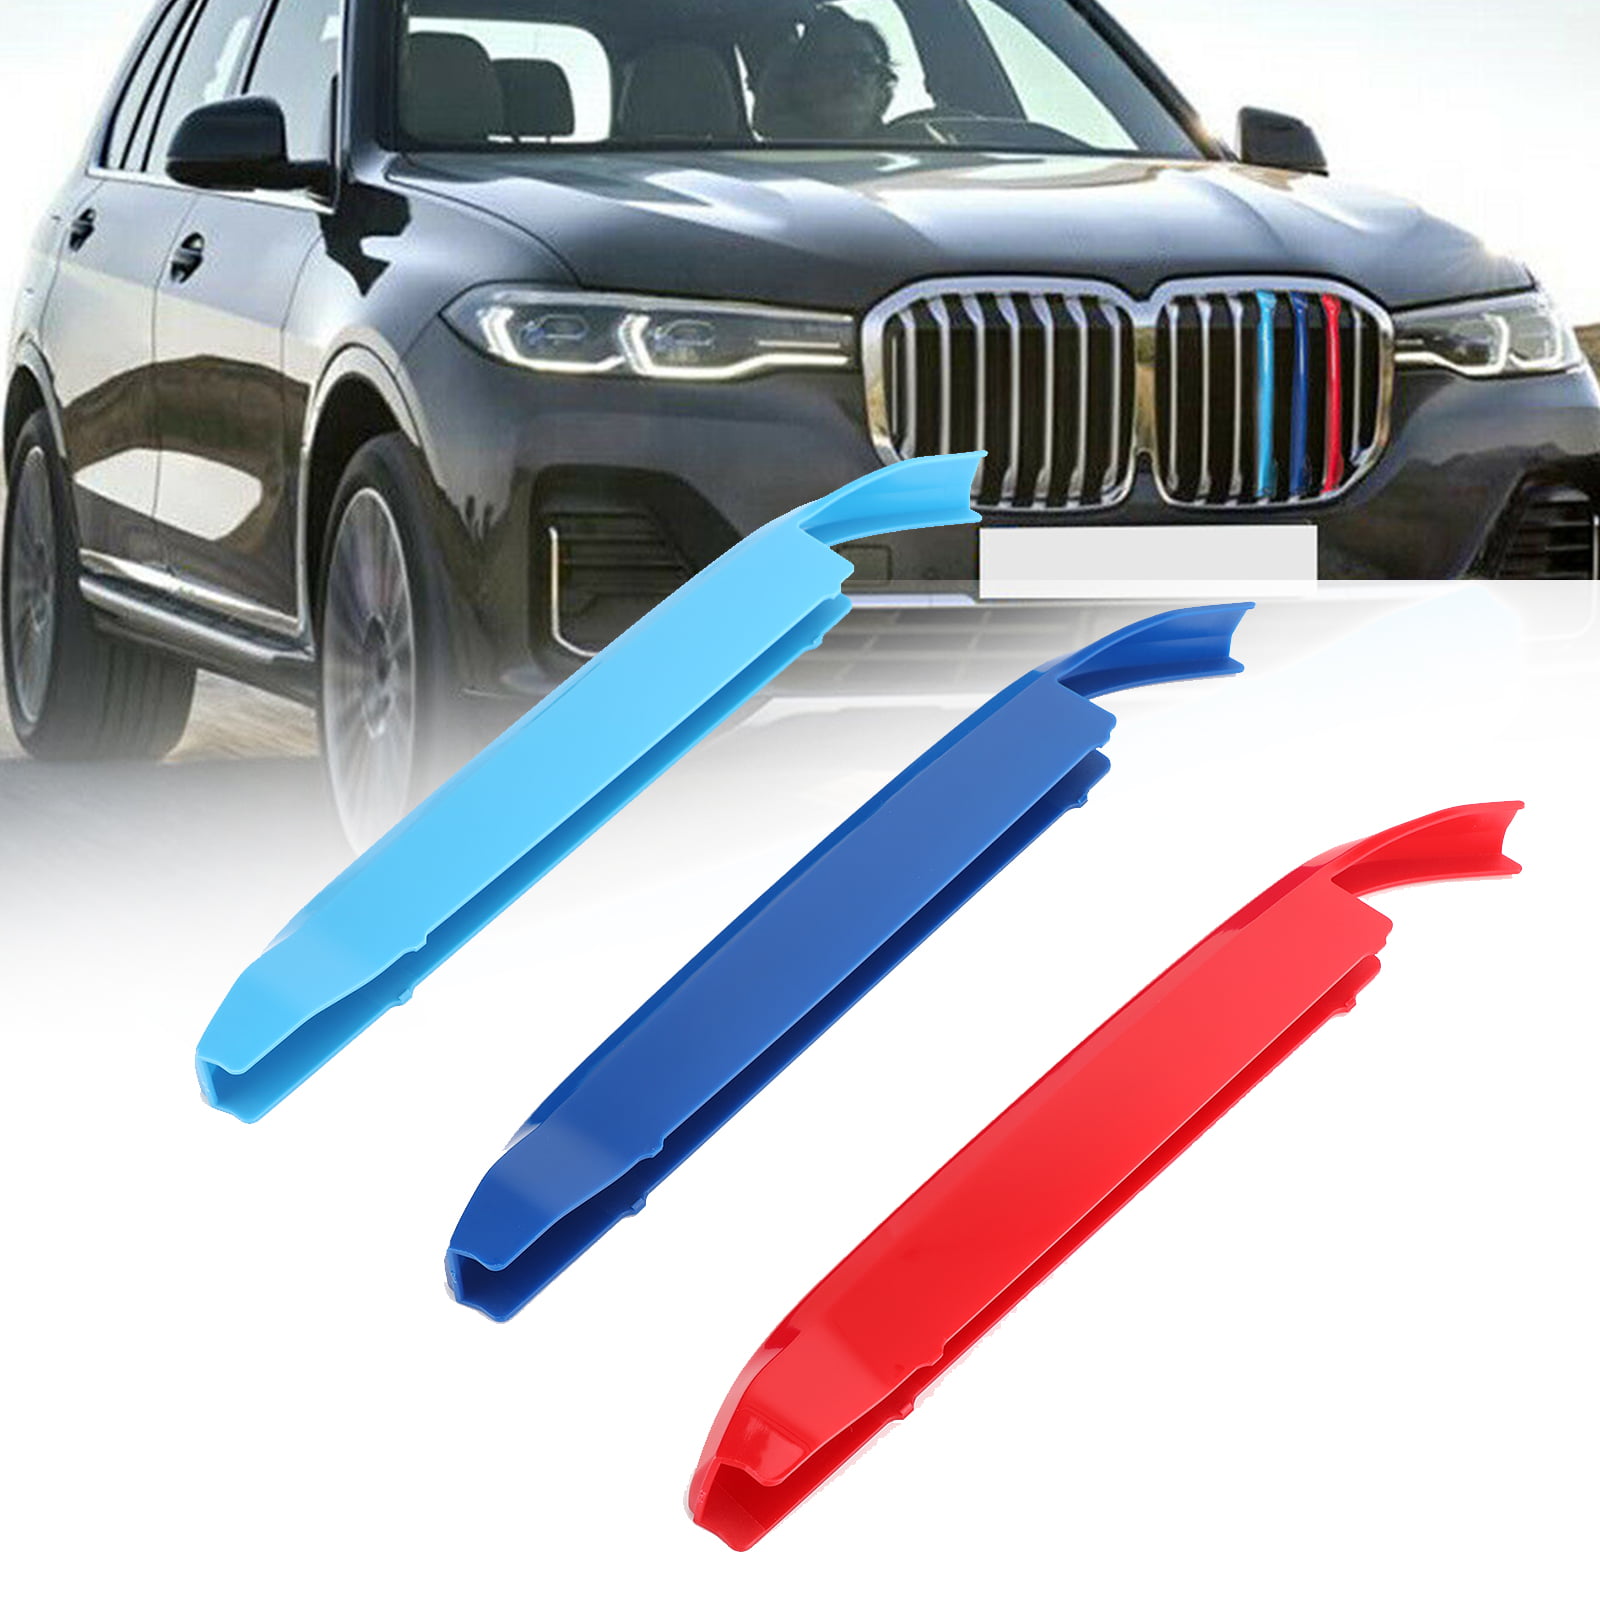 Solid Blue M-Color Front Grille Cover Insert Trim Decal 3pcs Fit for BMW Parts